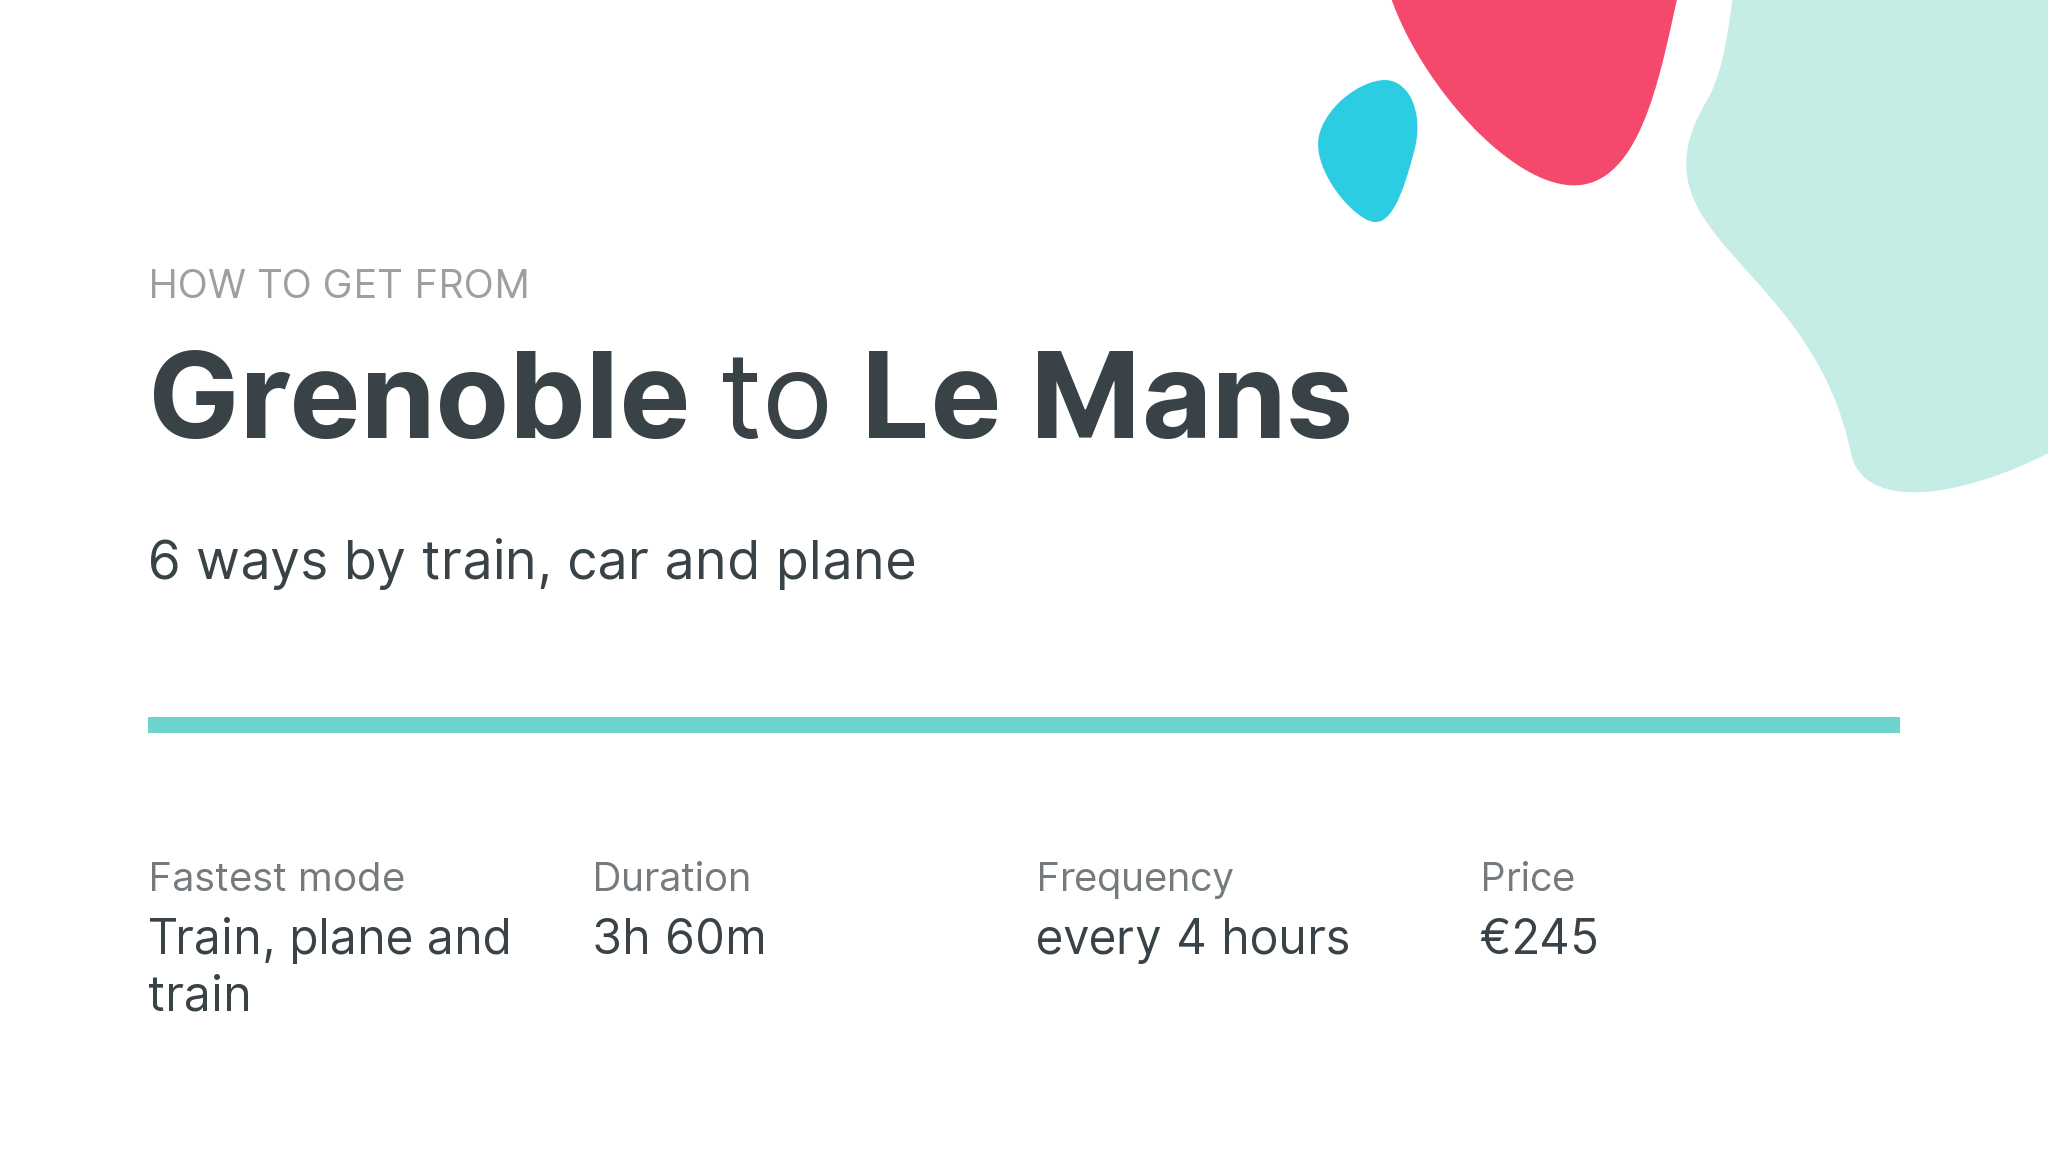 How do I get from Grenoble to Le Mans